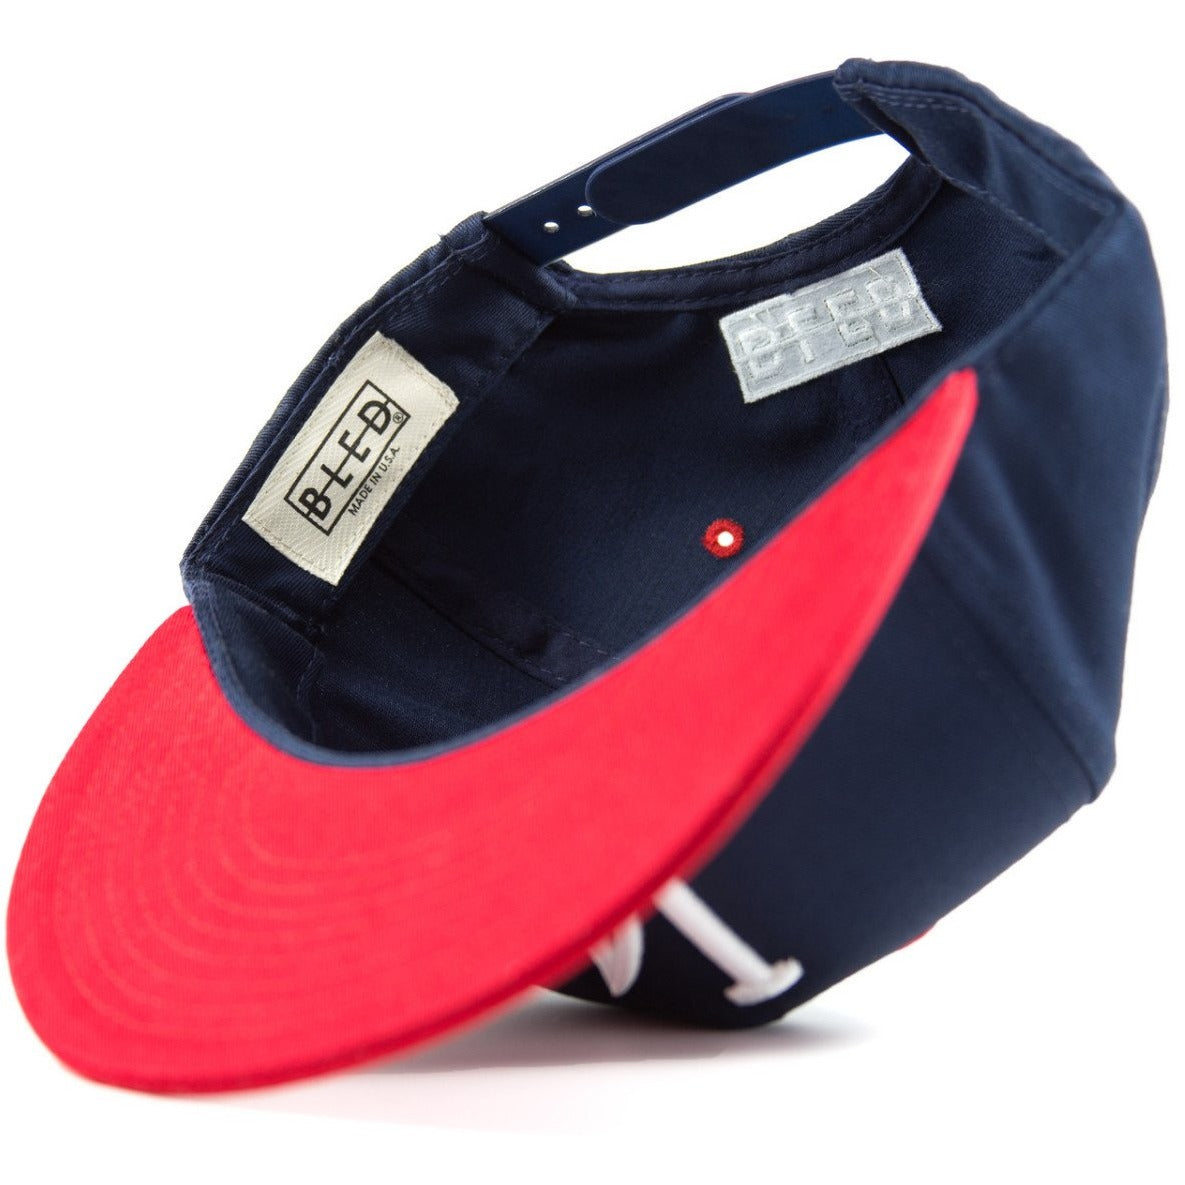 Five-panel navy & red cotton/poly snapback featuring custom A.T.L.A. design in 3D embroidery on crown and Bled logo on the back. Los Angeles Dodgers Atlanta Braves, skateboards, hype, streetwear